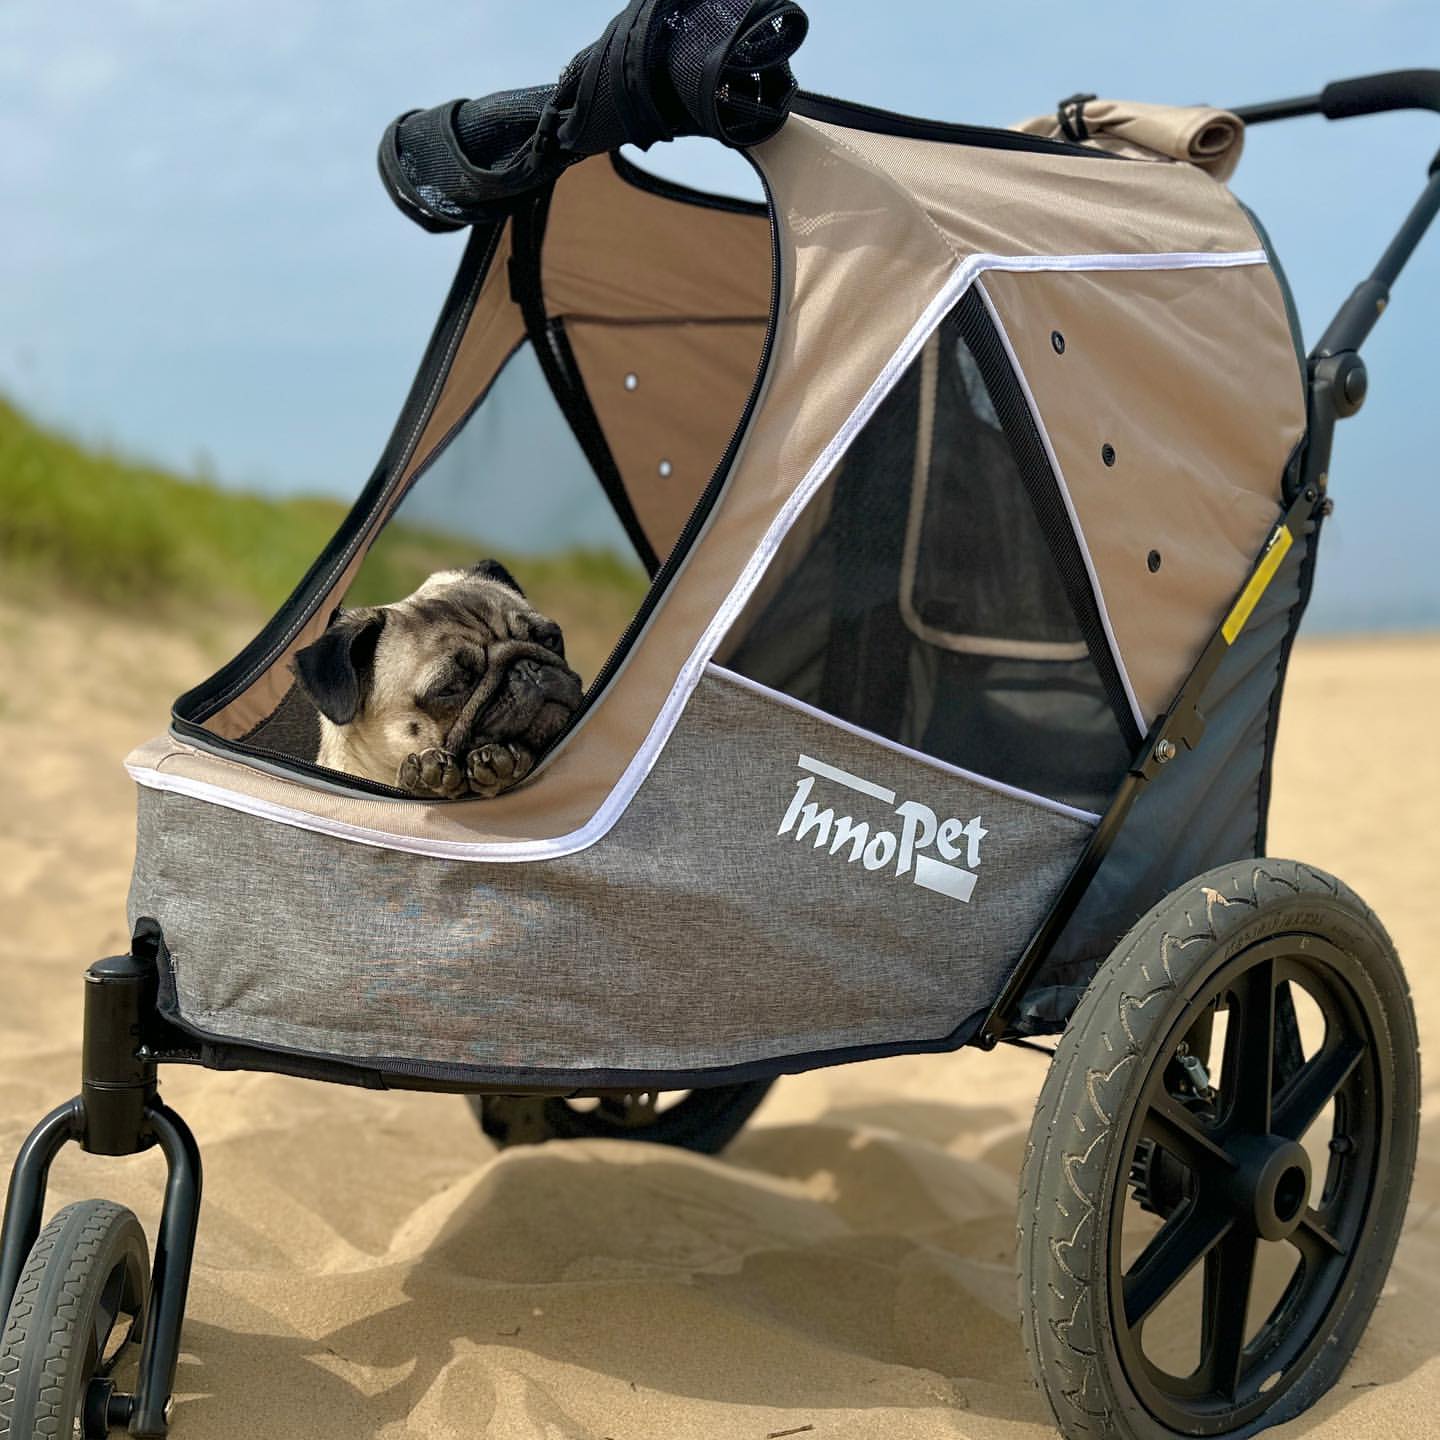 Taking your dog stroller on the beach